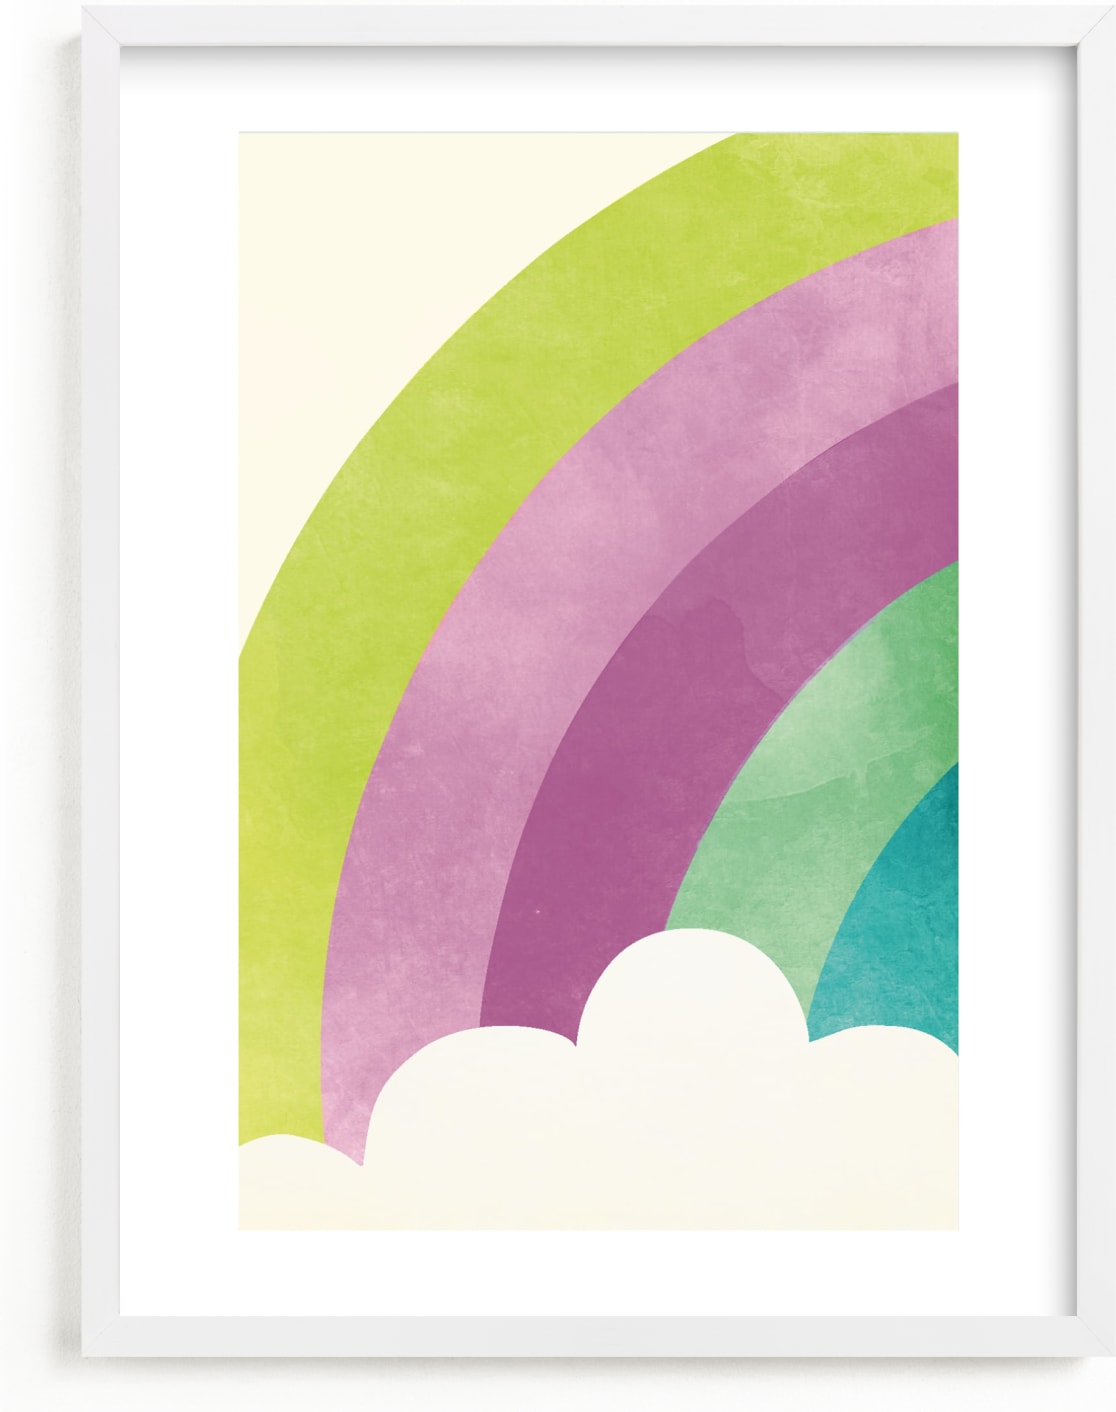 This is a colorful kids wall art by Lori Wemple called Bright Rainbow.